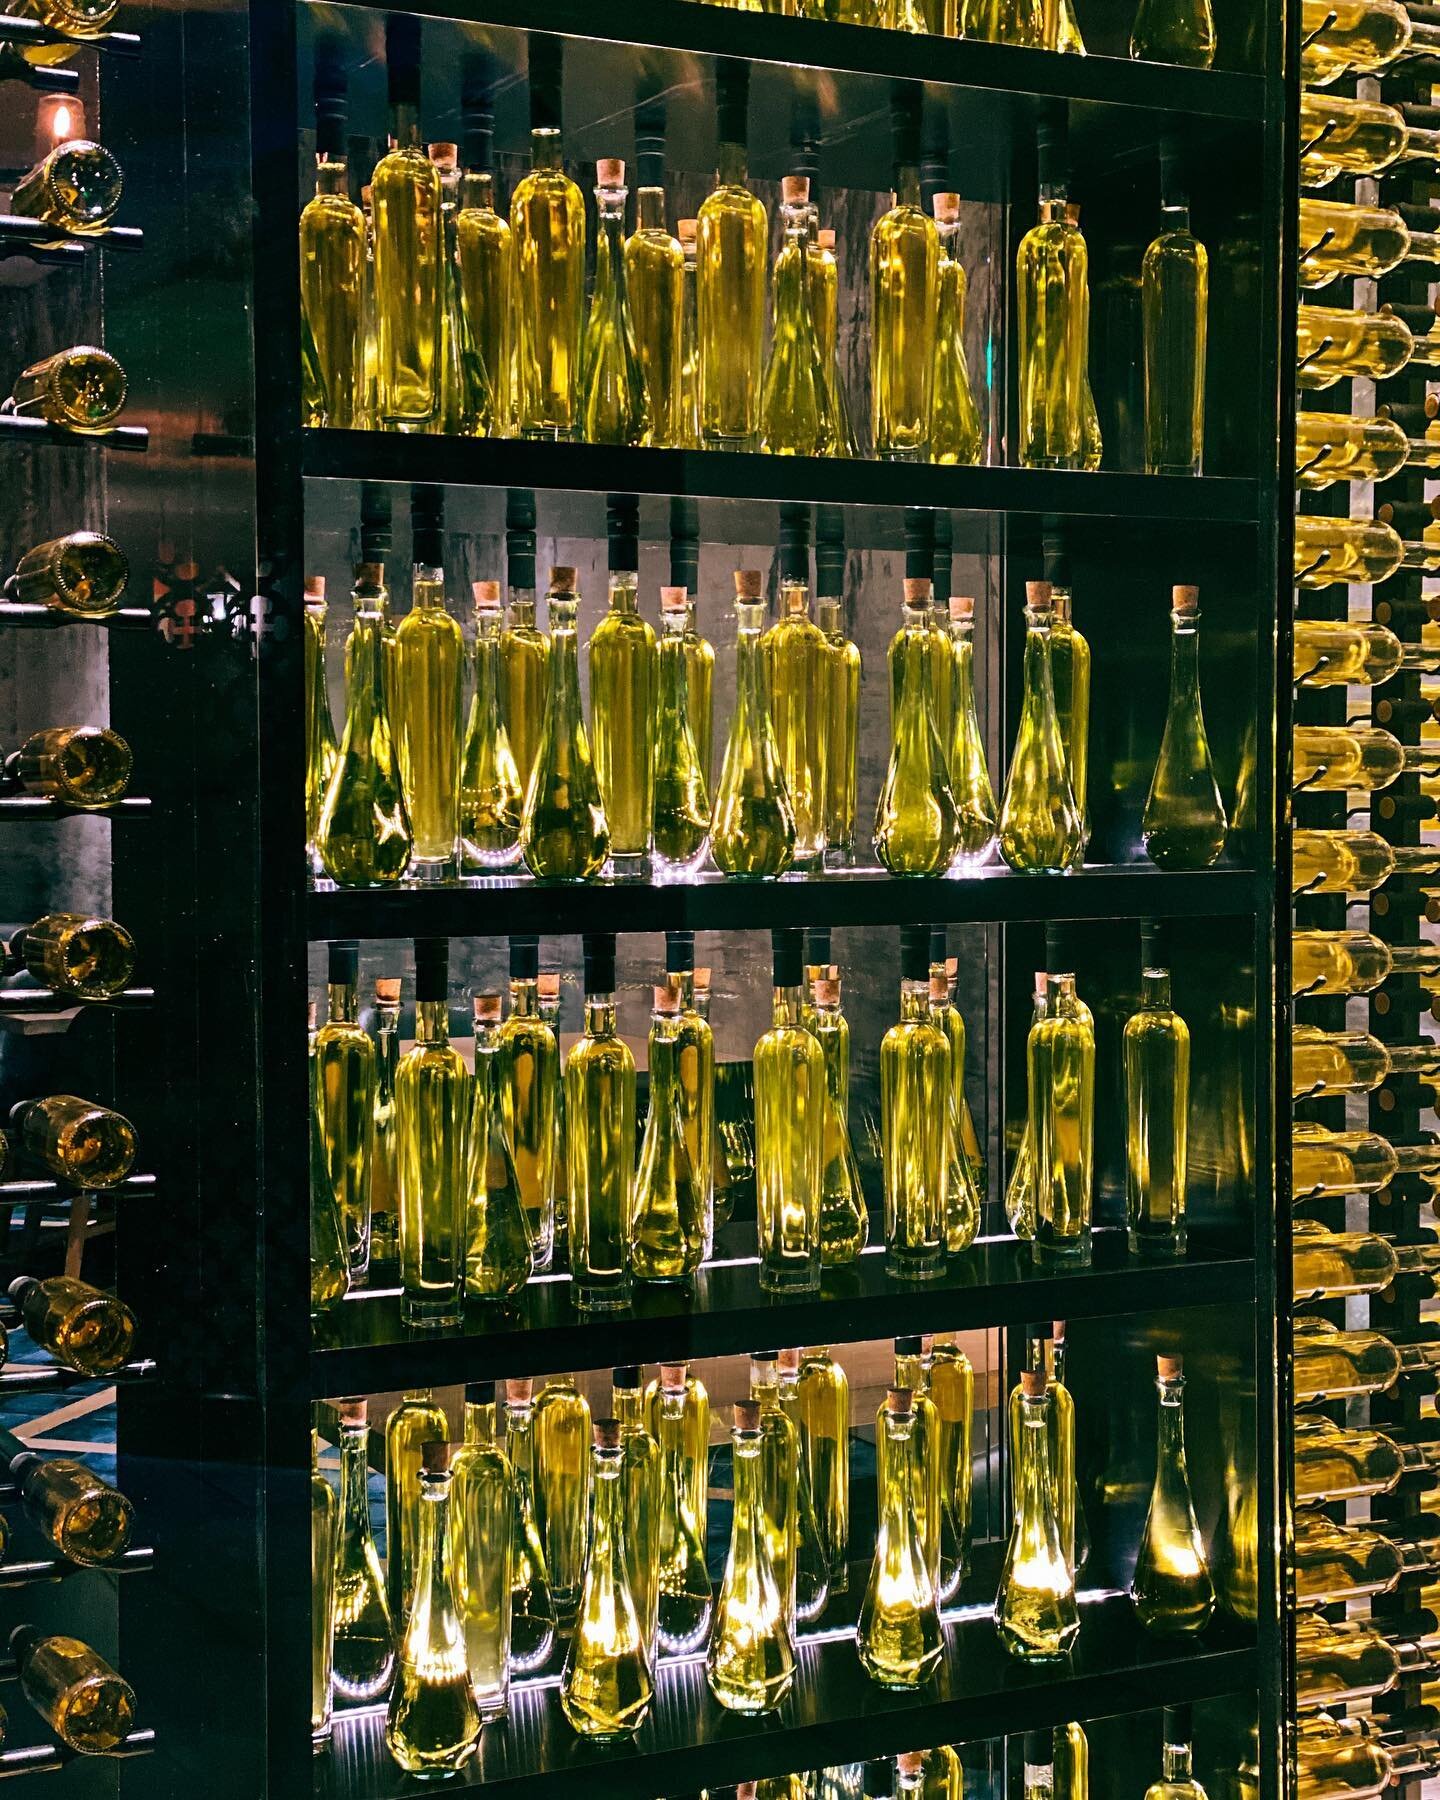 Olive oil wall &gt; wine wall 

#oliveoil #interiordesign #winewall #restaurantdesign #hospitalitydesign #hoteldesign #gaylordpalms #kissimmee #architecture #florida